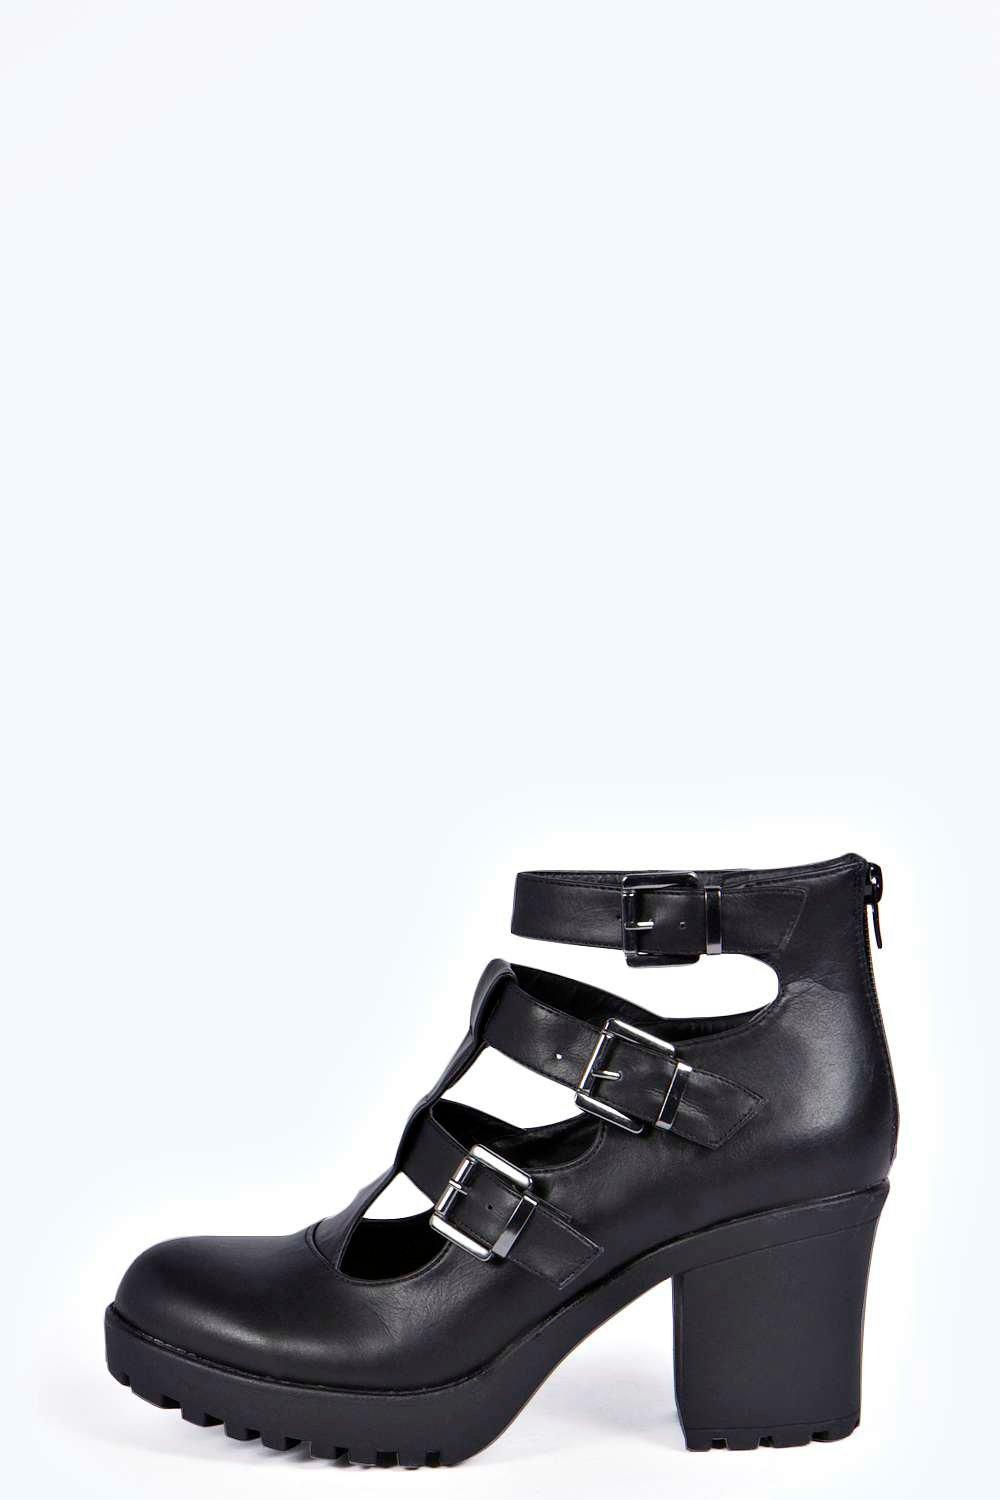 Jessie Cut Work Cleated Side Boot at boohoo.com